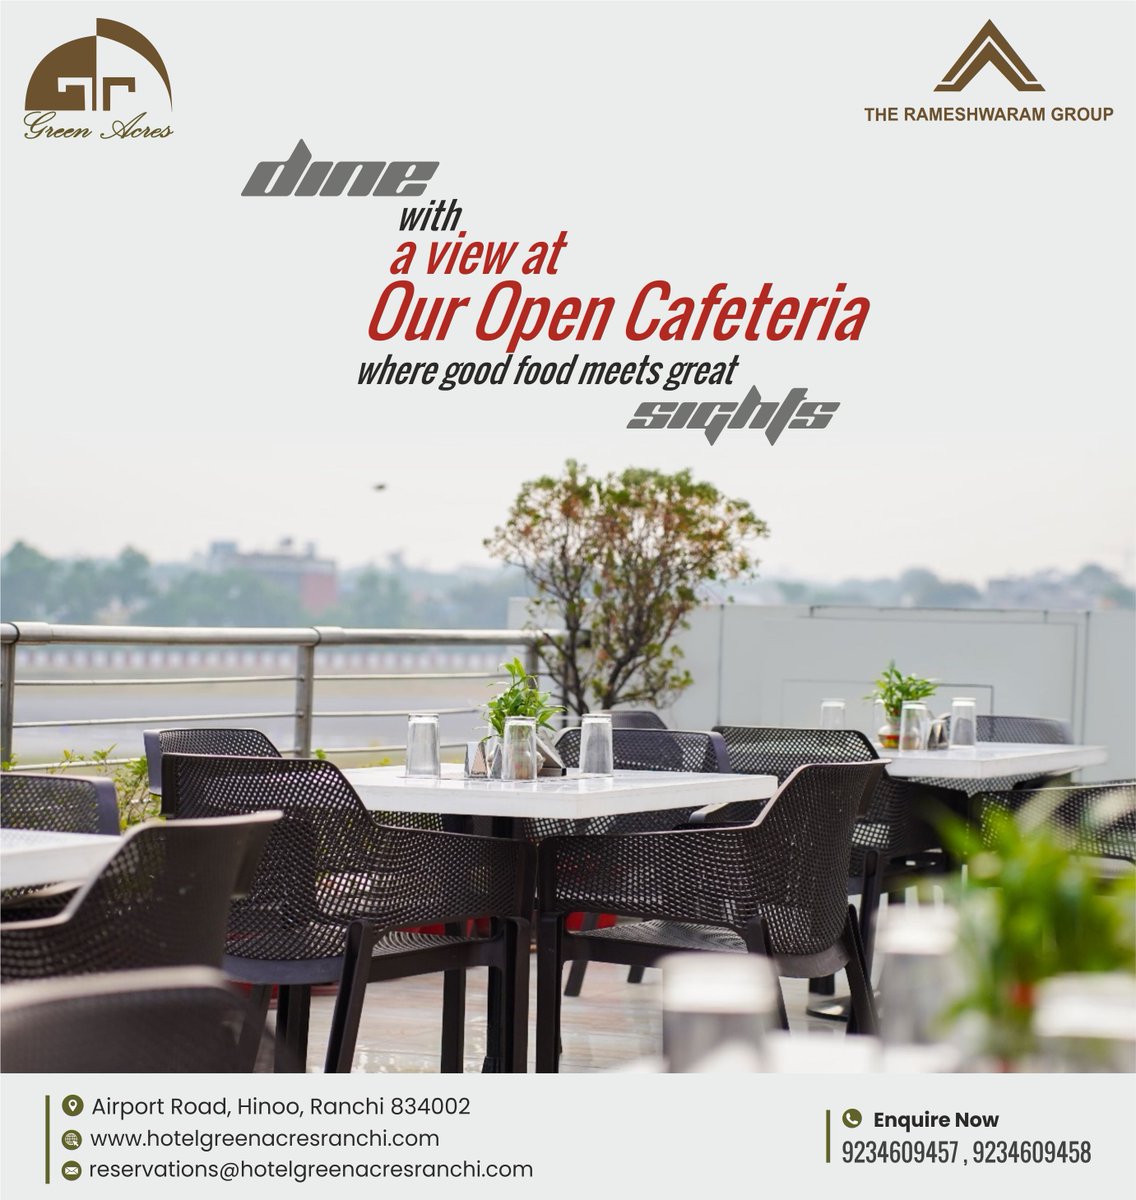 Green Acres: Enjoy View at our Open Cafeteria.
.
#rameshwaramgroups #greenacres #hospitality #hospitalityexcellence #food #foodiegram #hotel #hotelroom #hotelbooking #hotelsandresorts